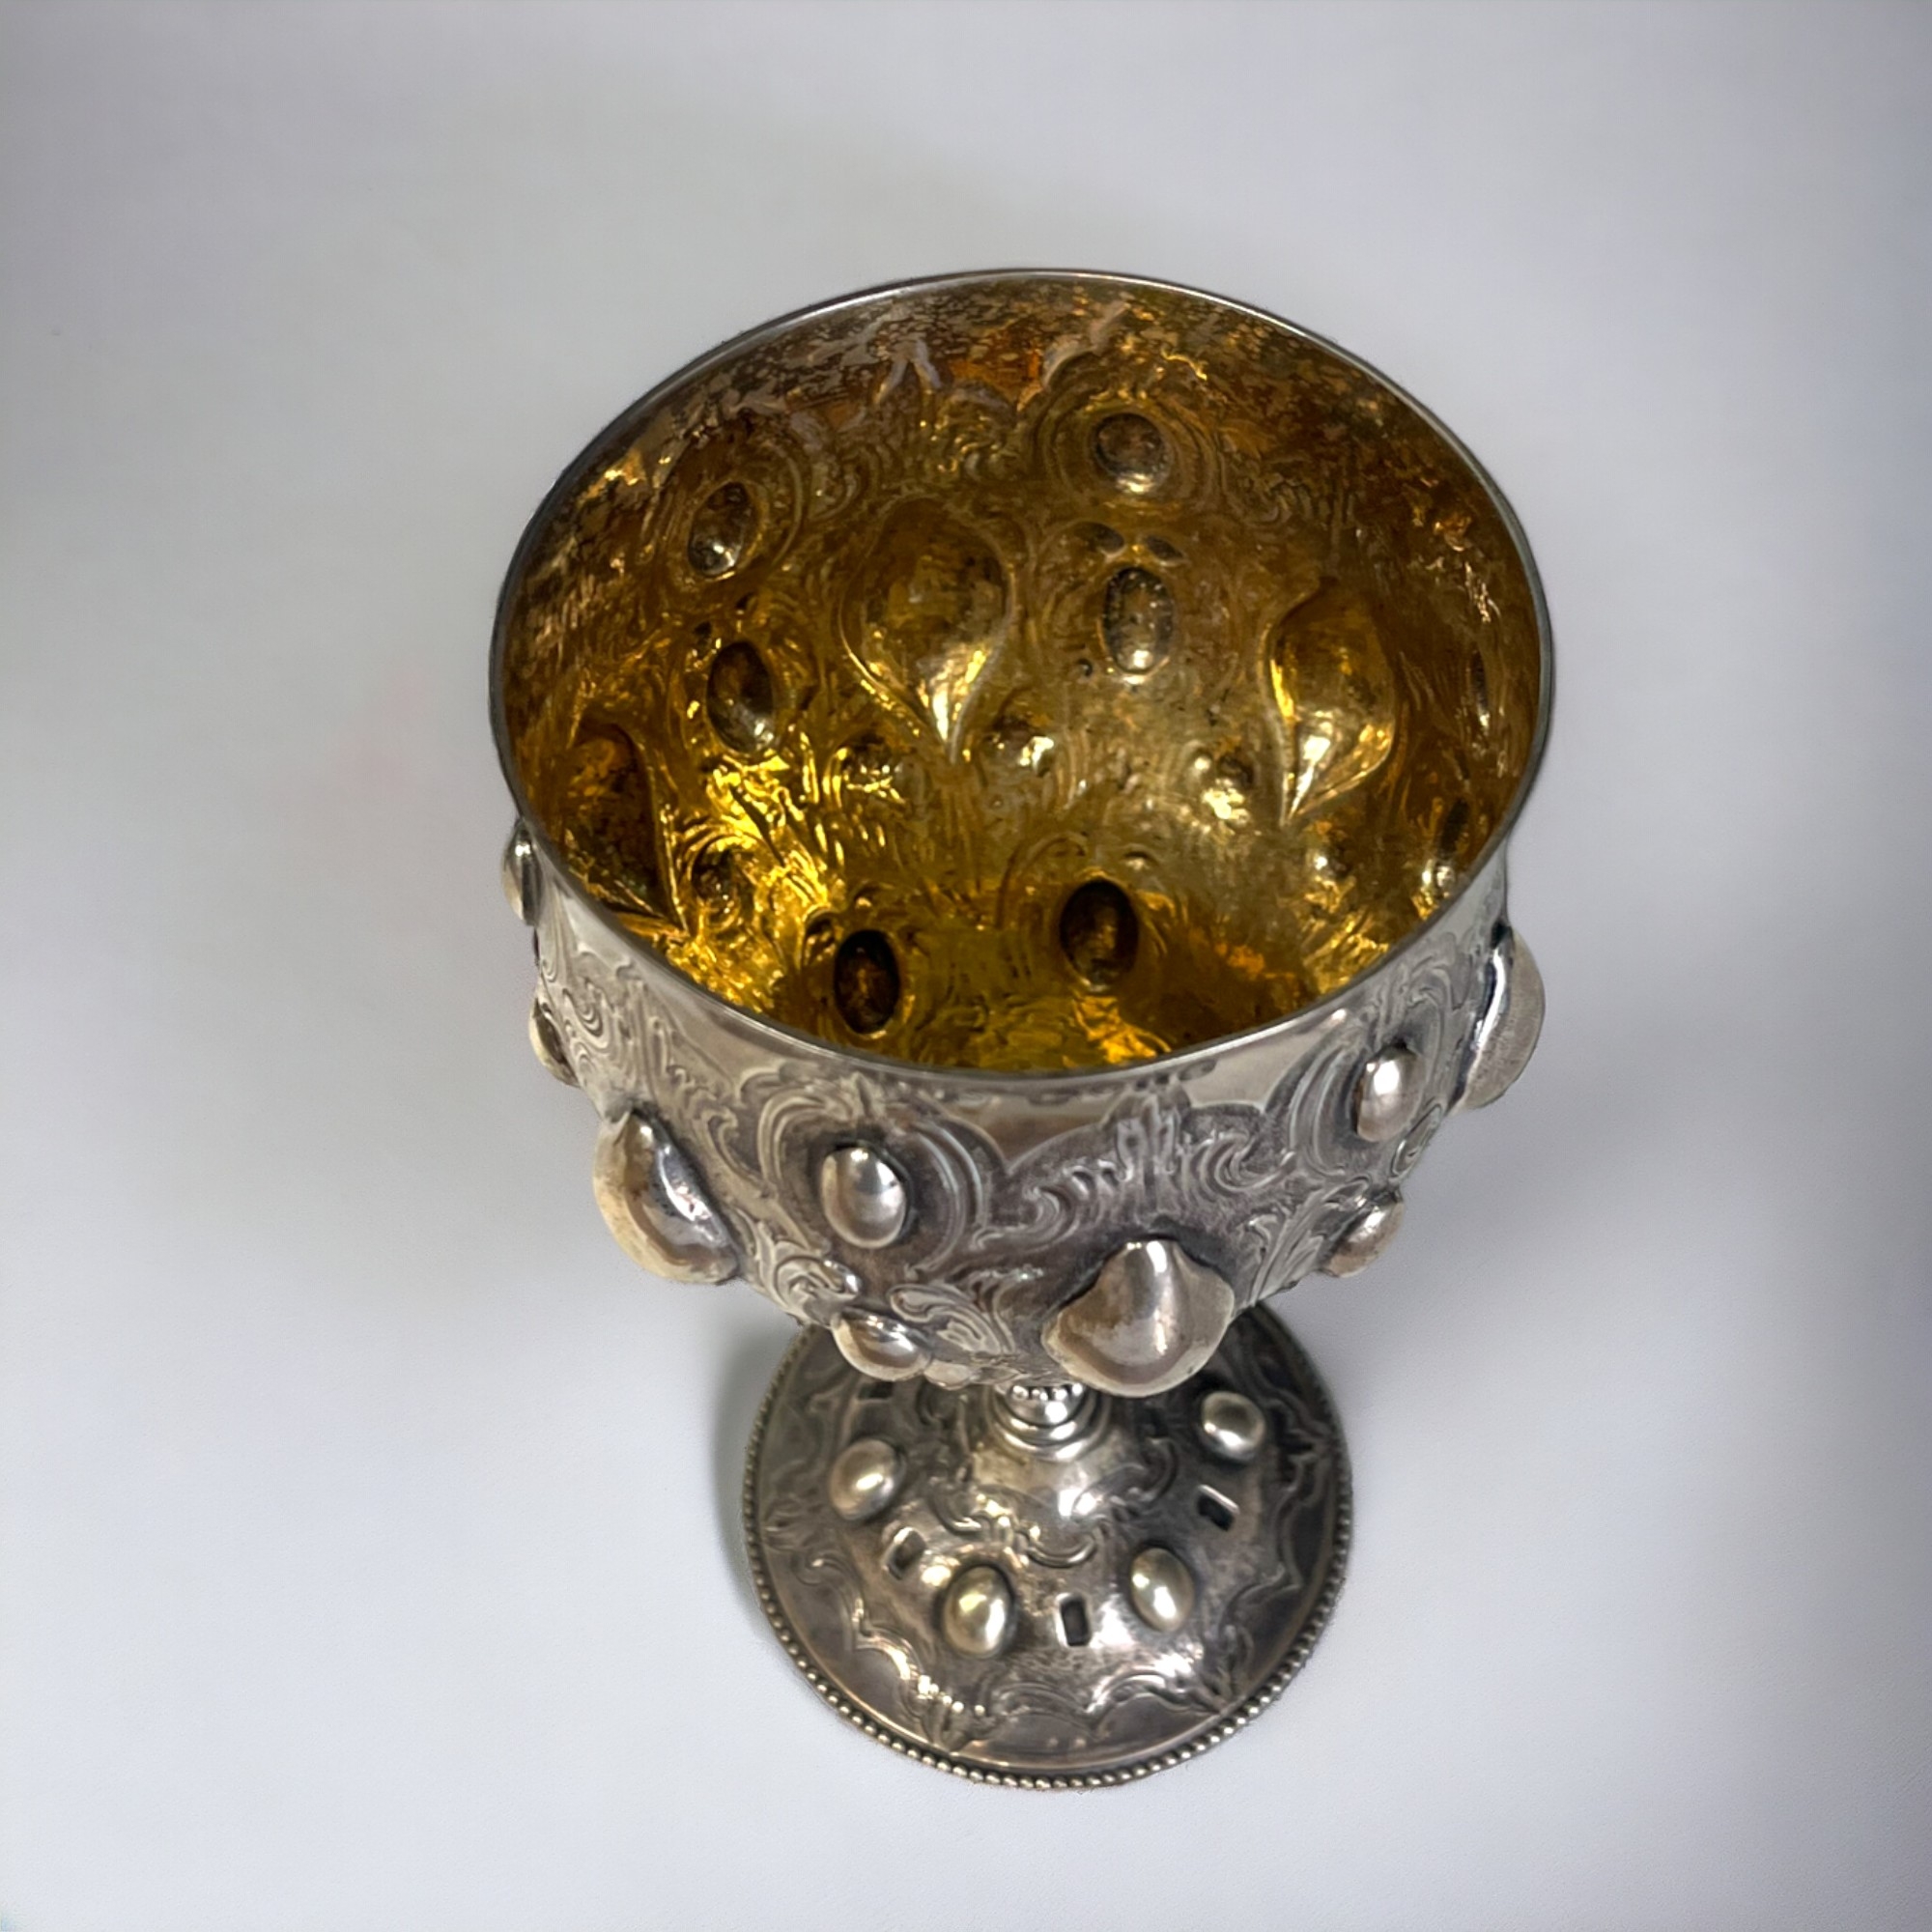 A 19th century sterling silver goblet. Thomas Smiley, London. London, 1864 hallmarks. Height - 15cm - Image 4 of 4